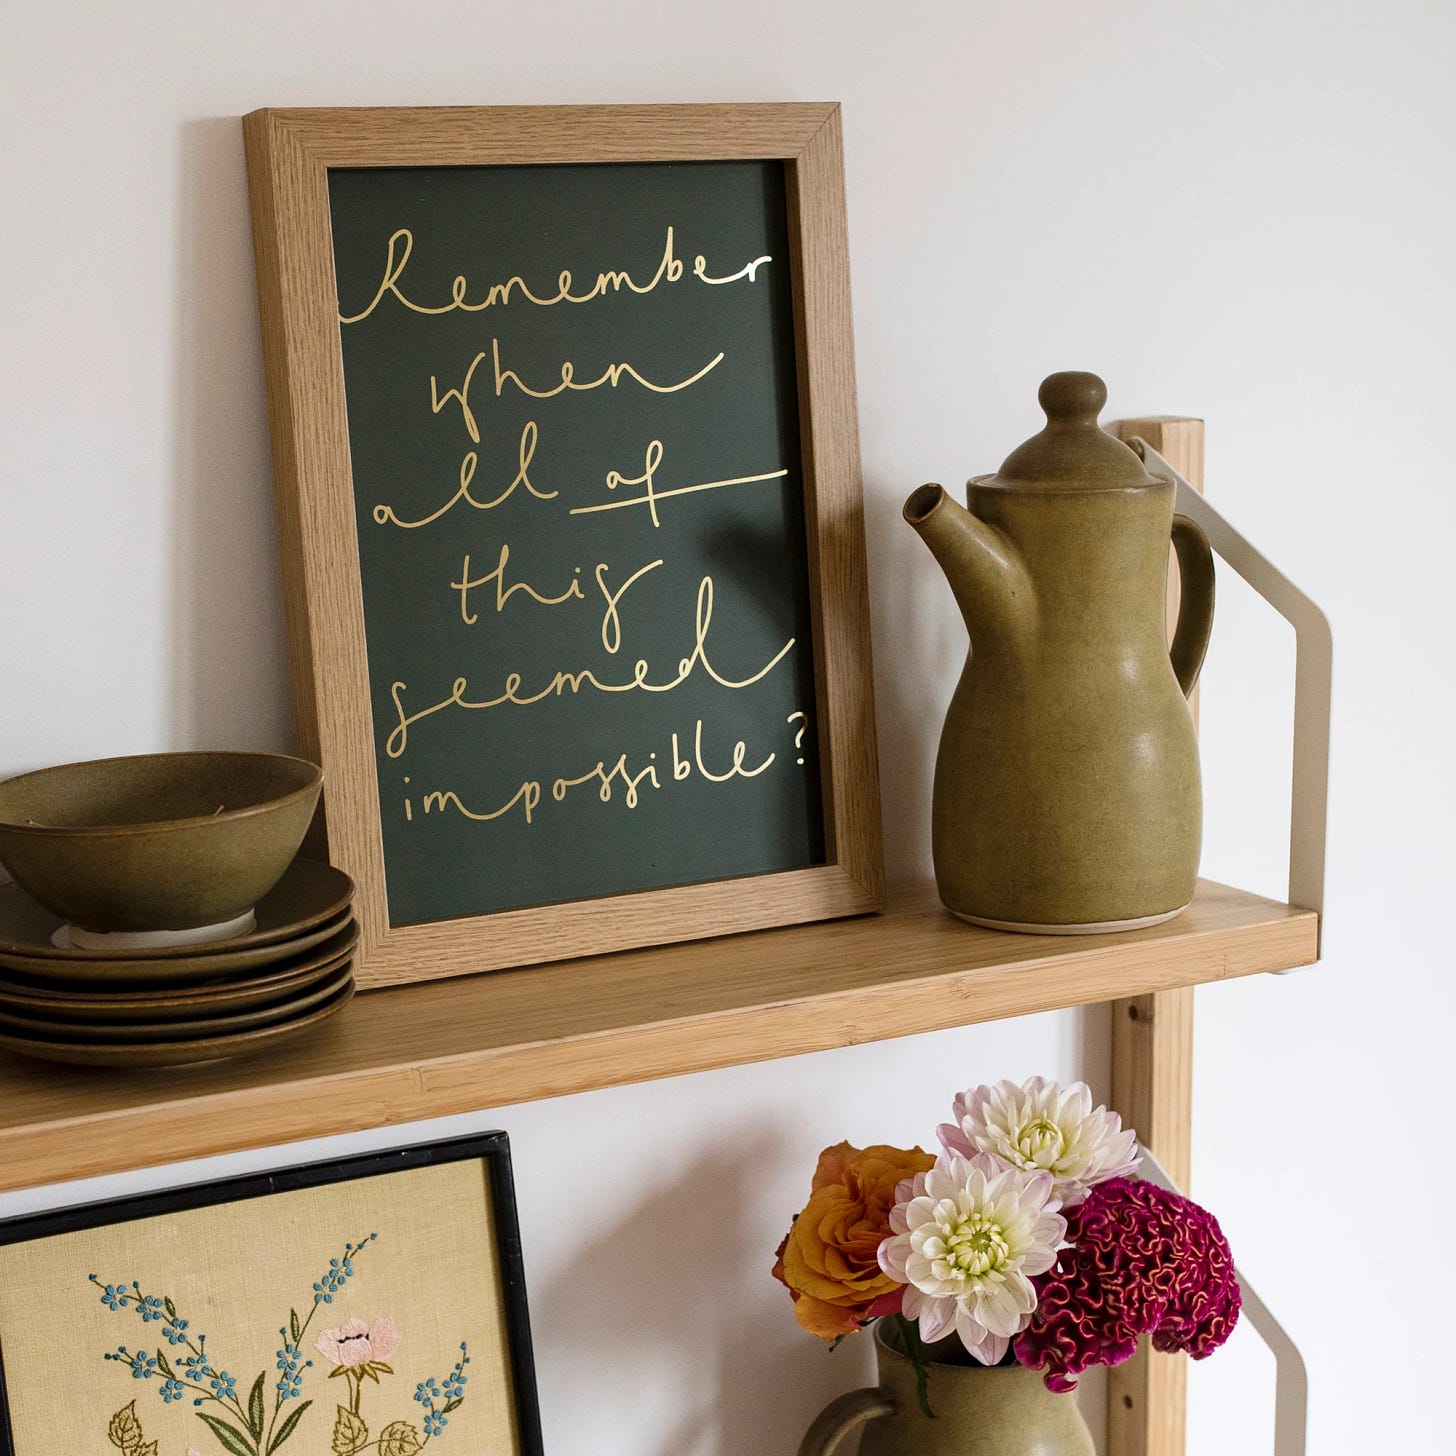 A shelf with a framed print that reads 'Remember when all of this seemed impossible' in handwritten text.